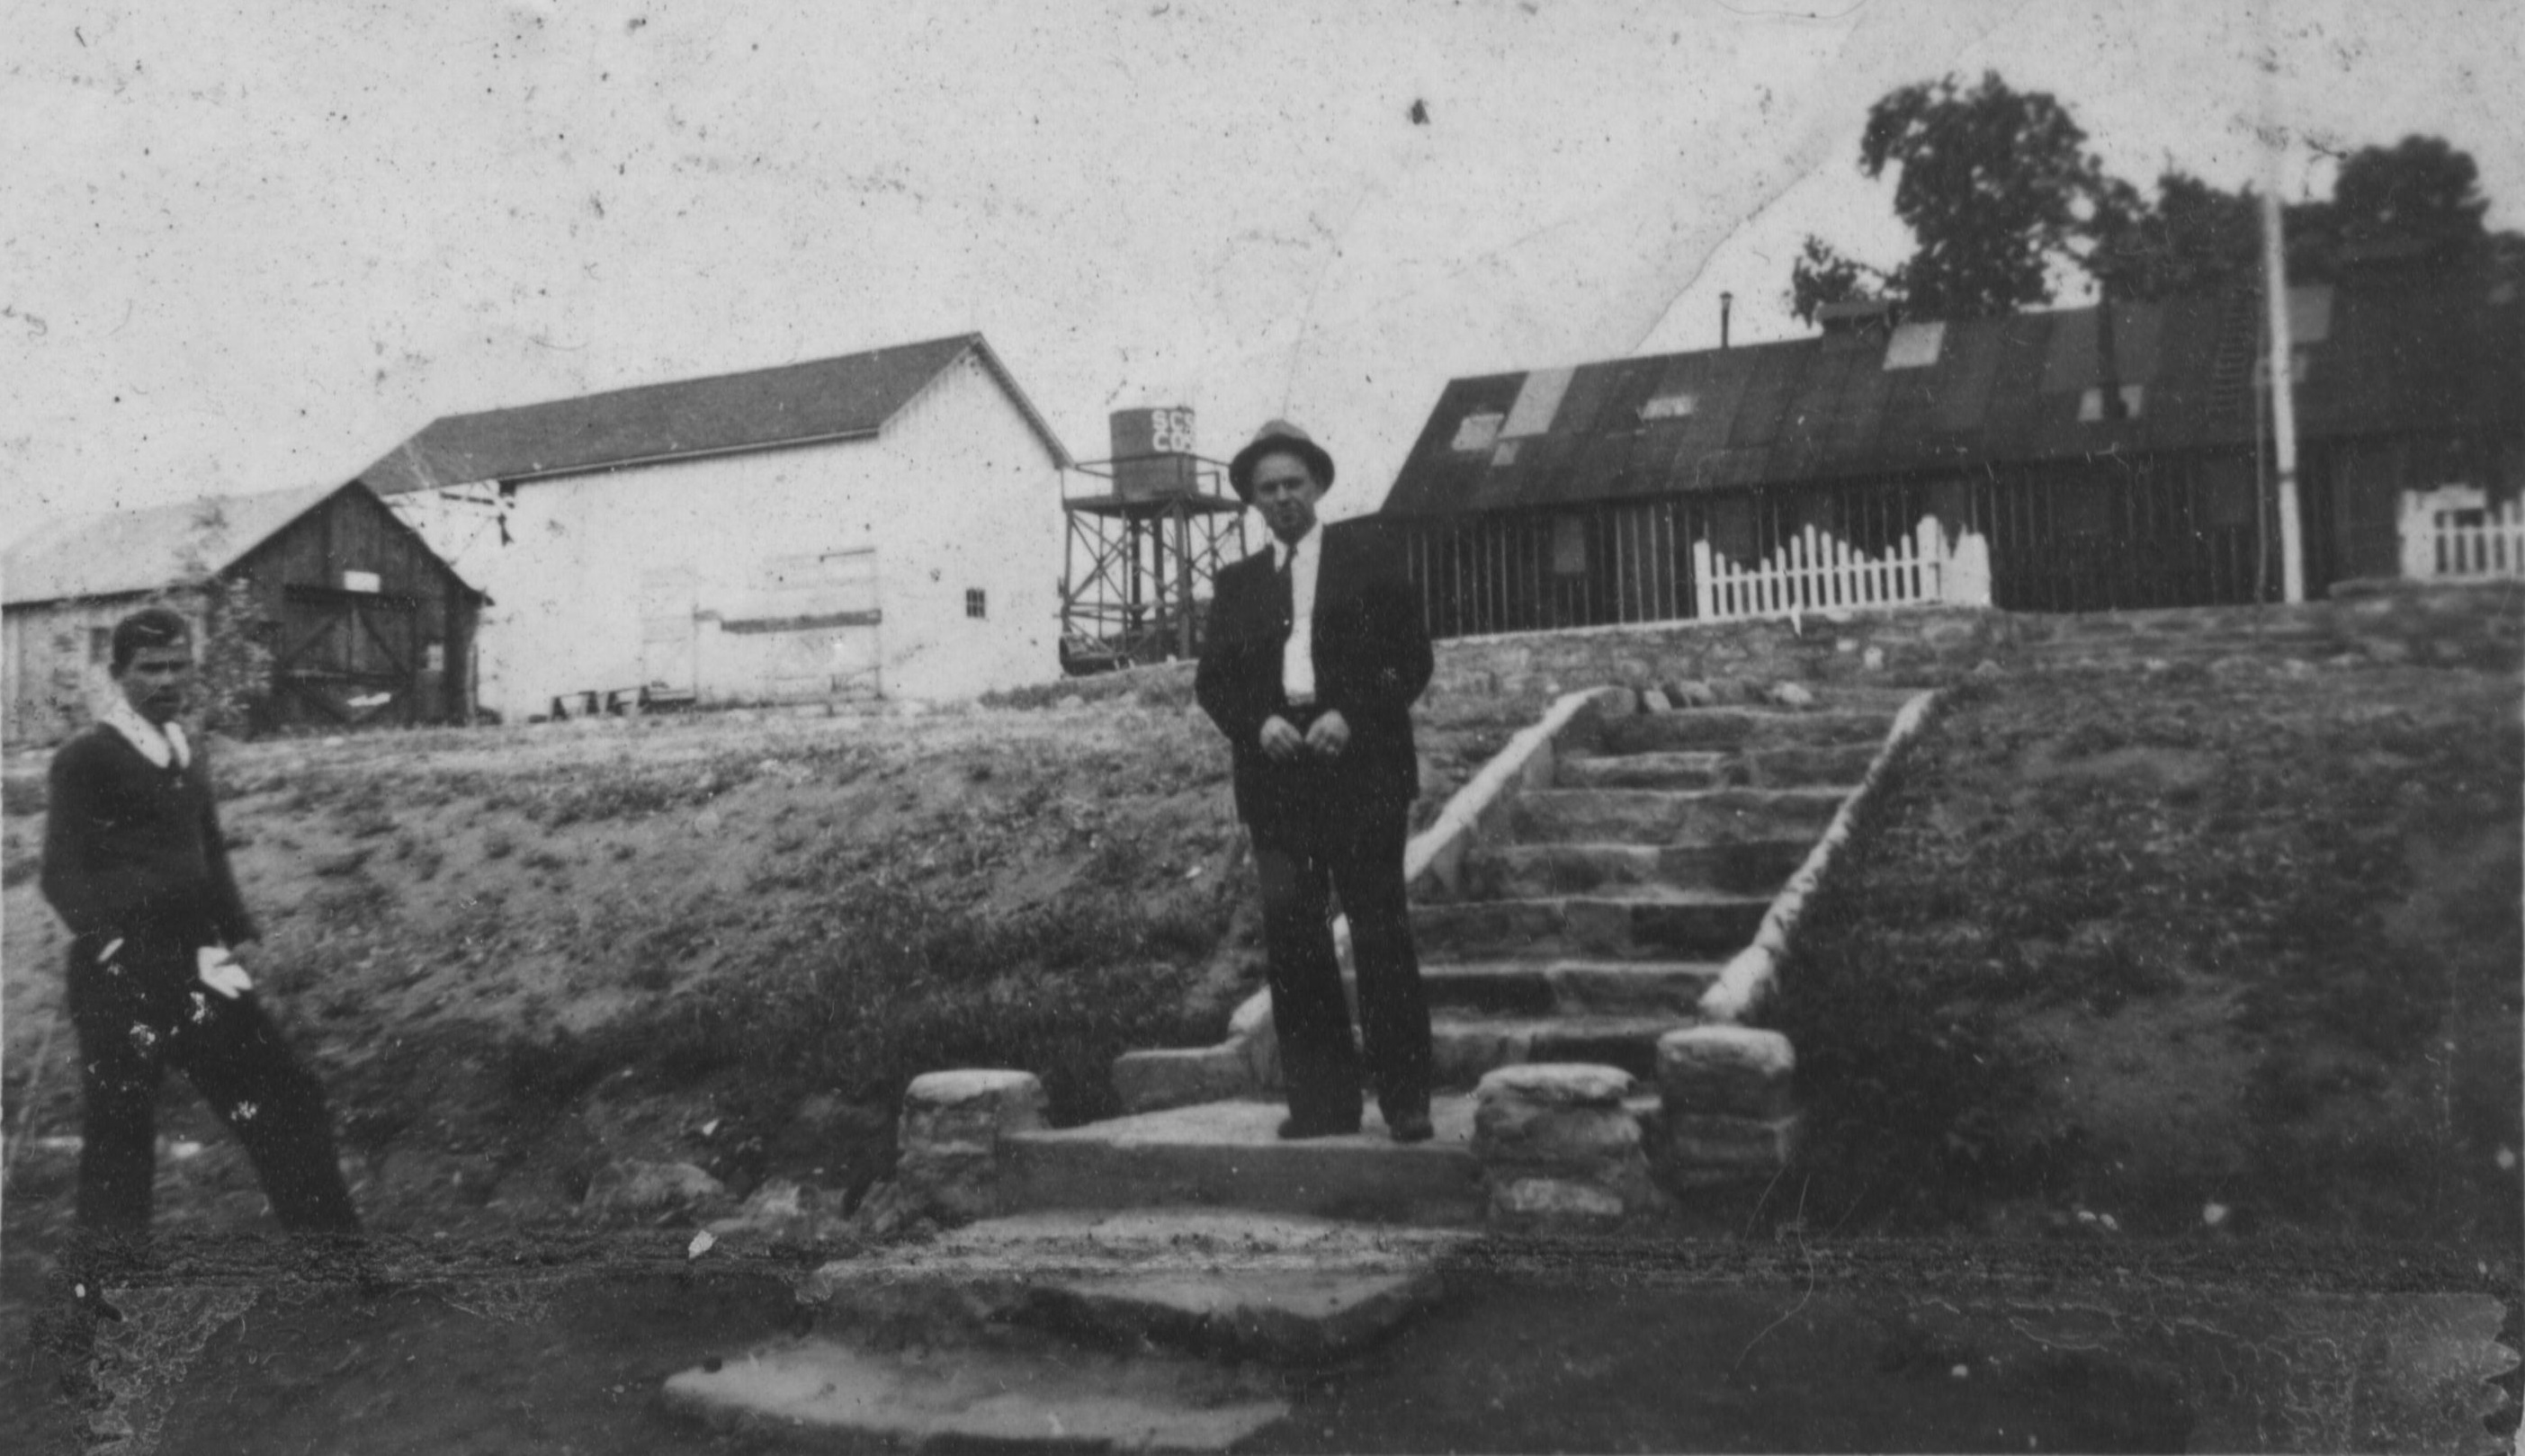 Two men and some of the buildings at the Leeds CCC Camp